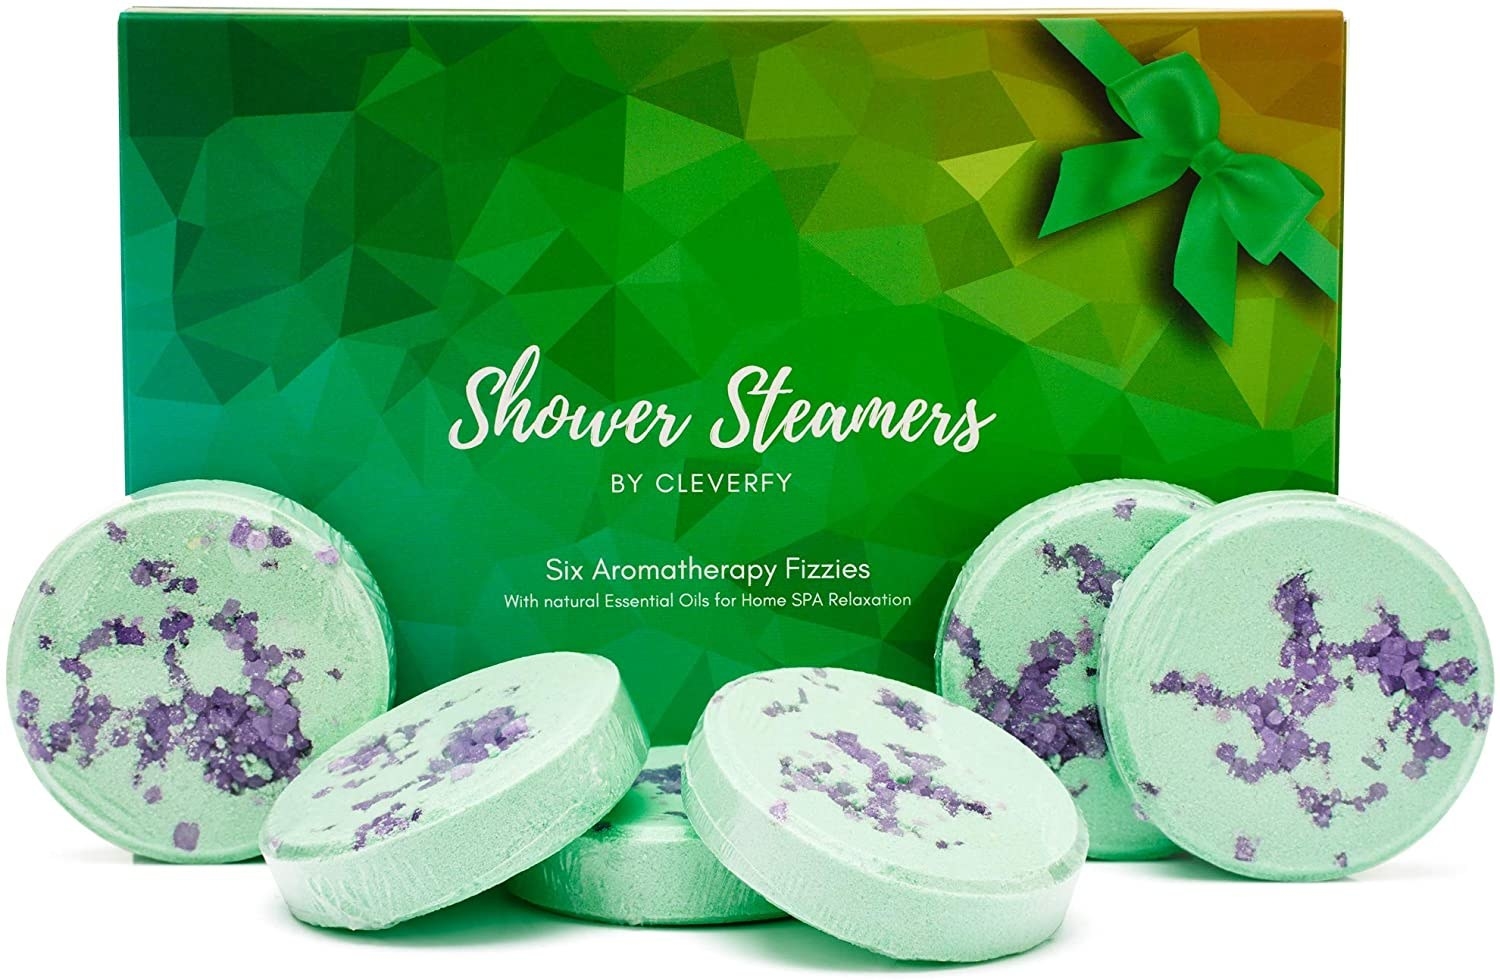 the disc-shaped shower steamers and the gift box